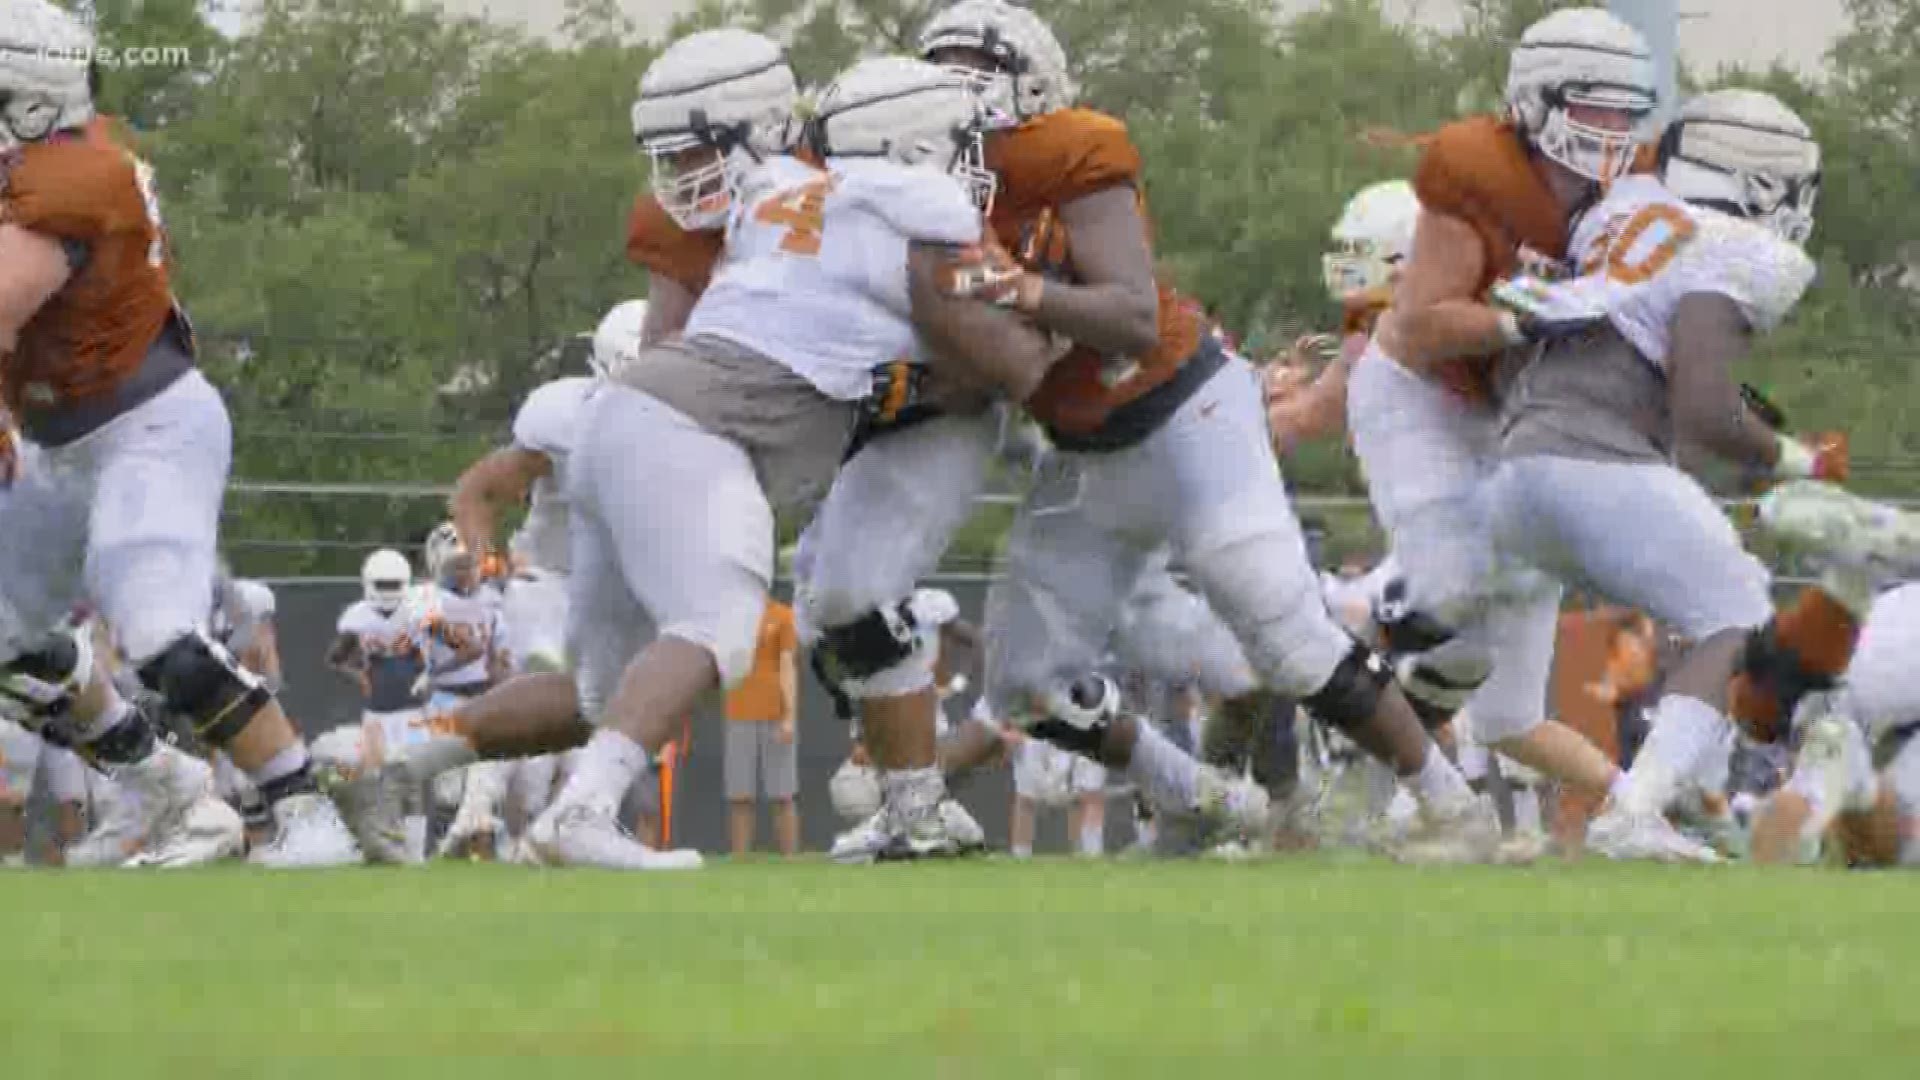 Tom Herman said he was pleased with how the Longhorns played during their scrimmage.